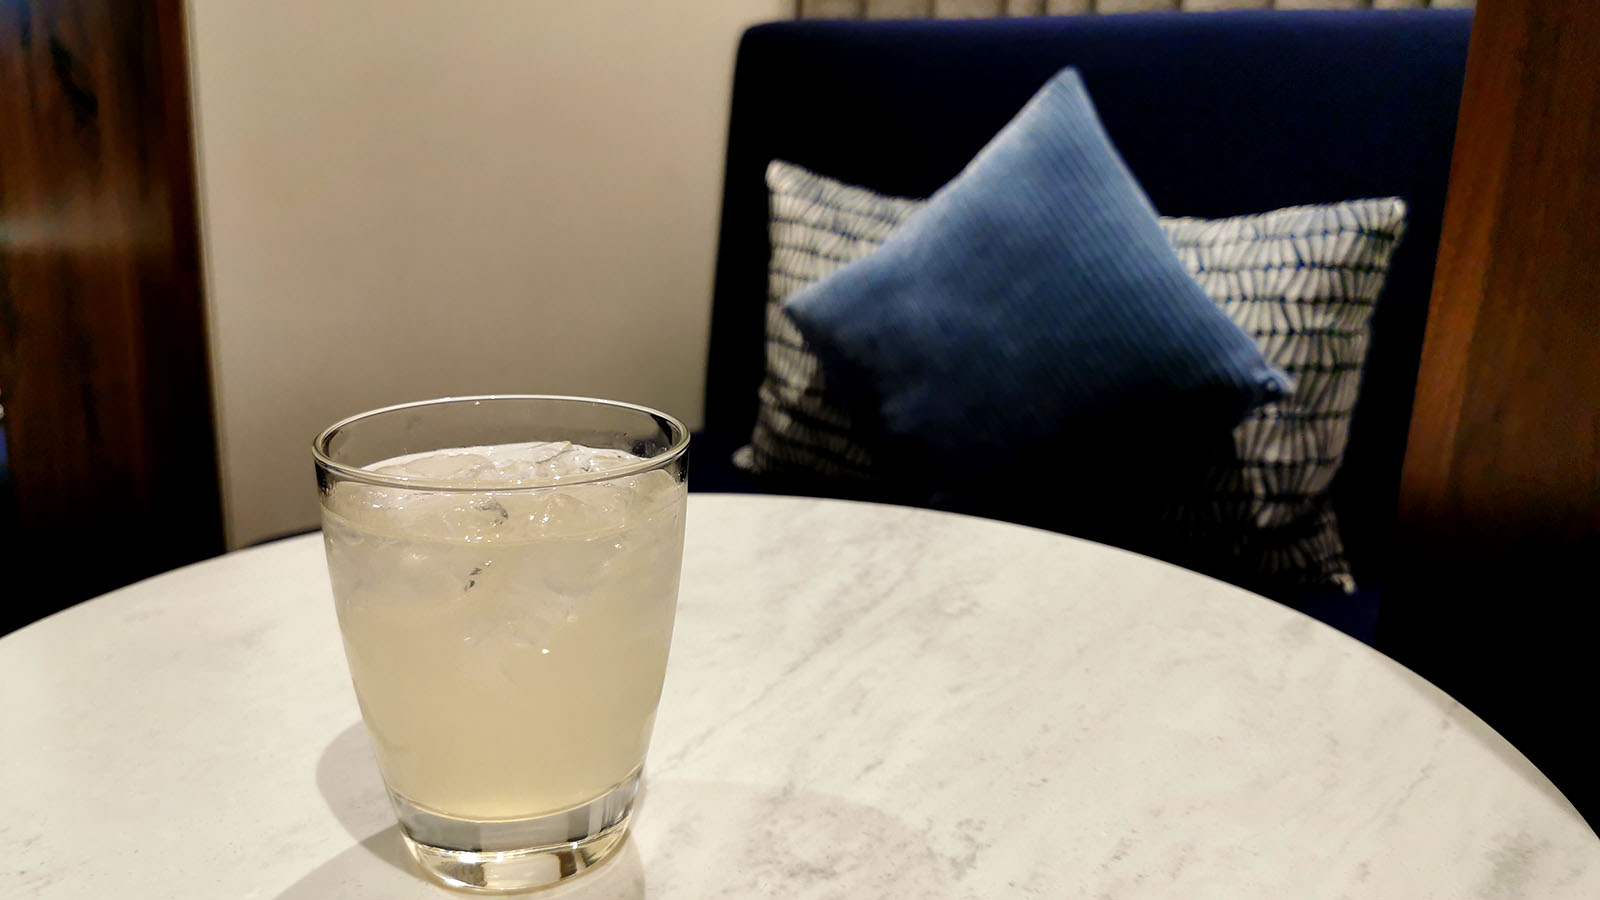 Free drink in a credit card lounge